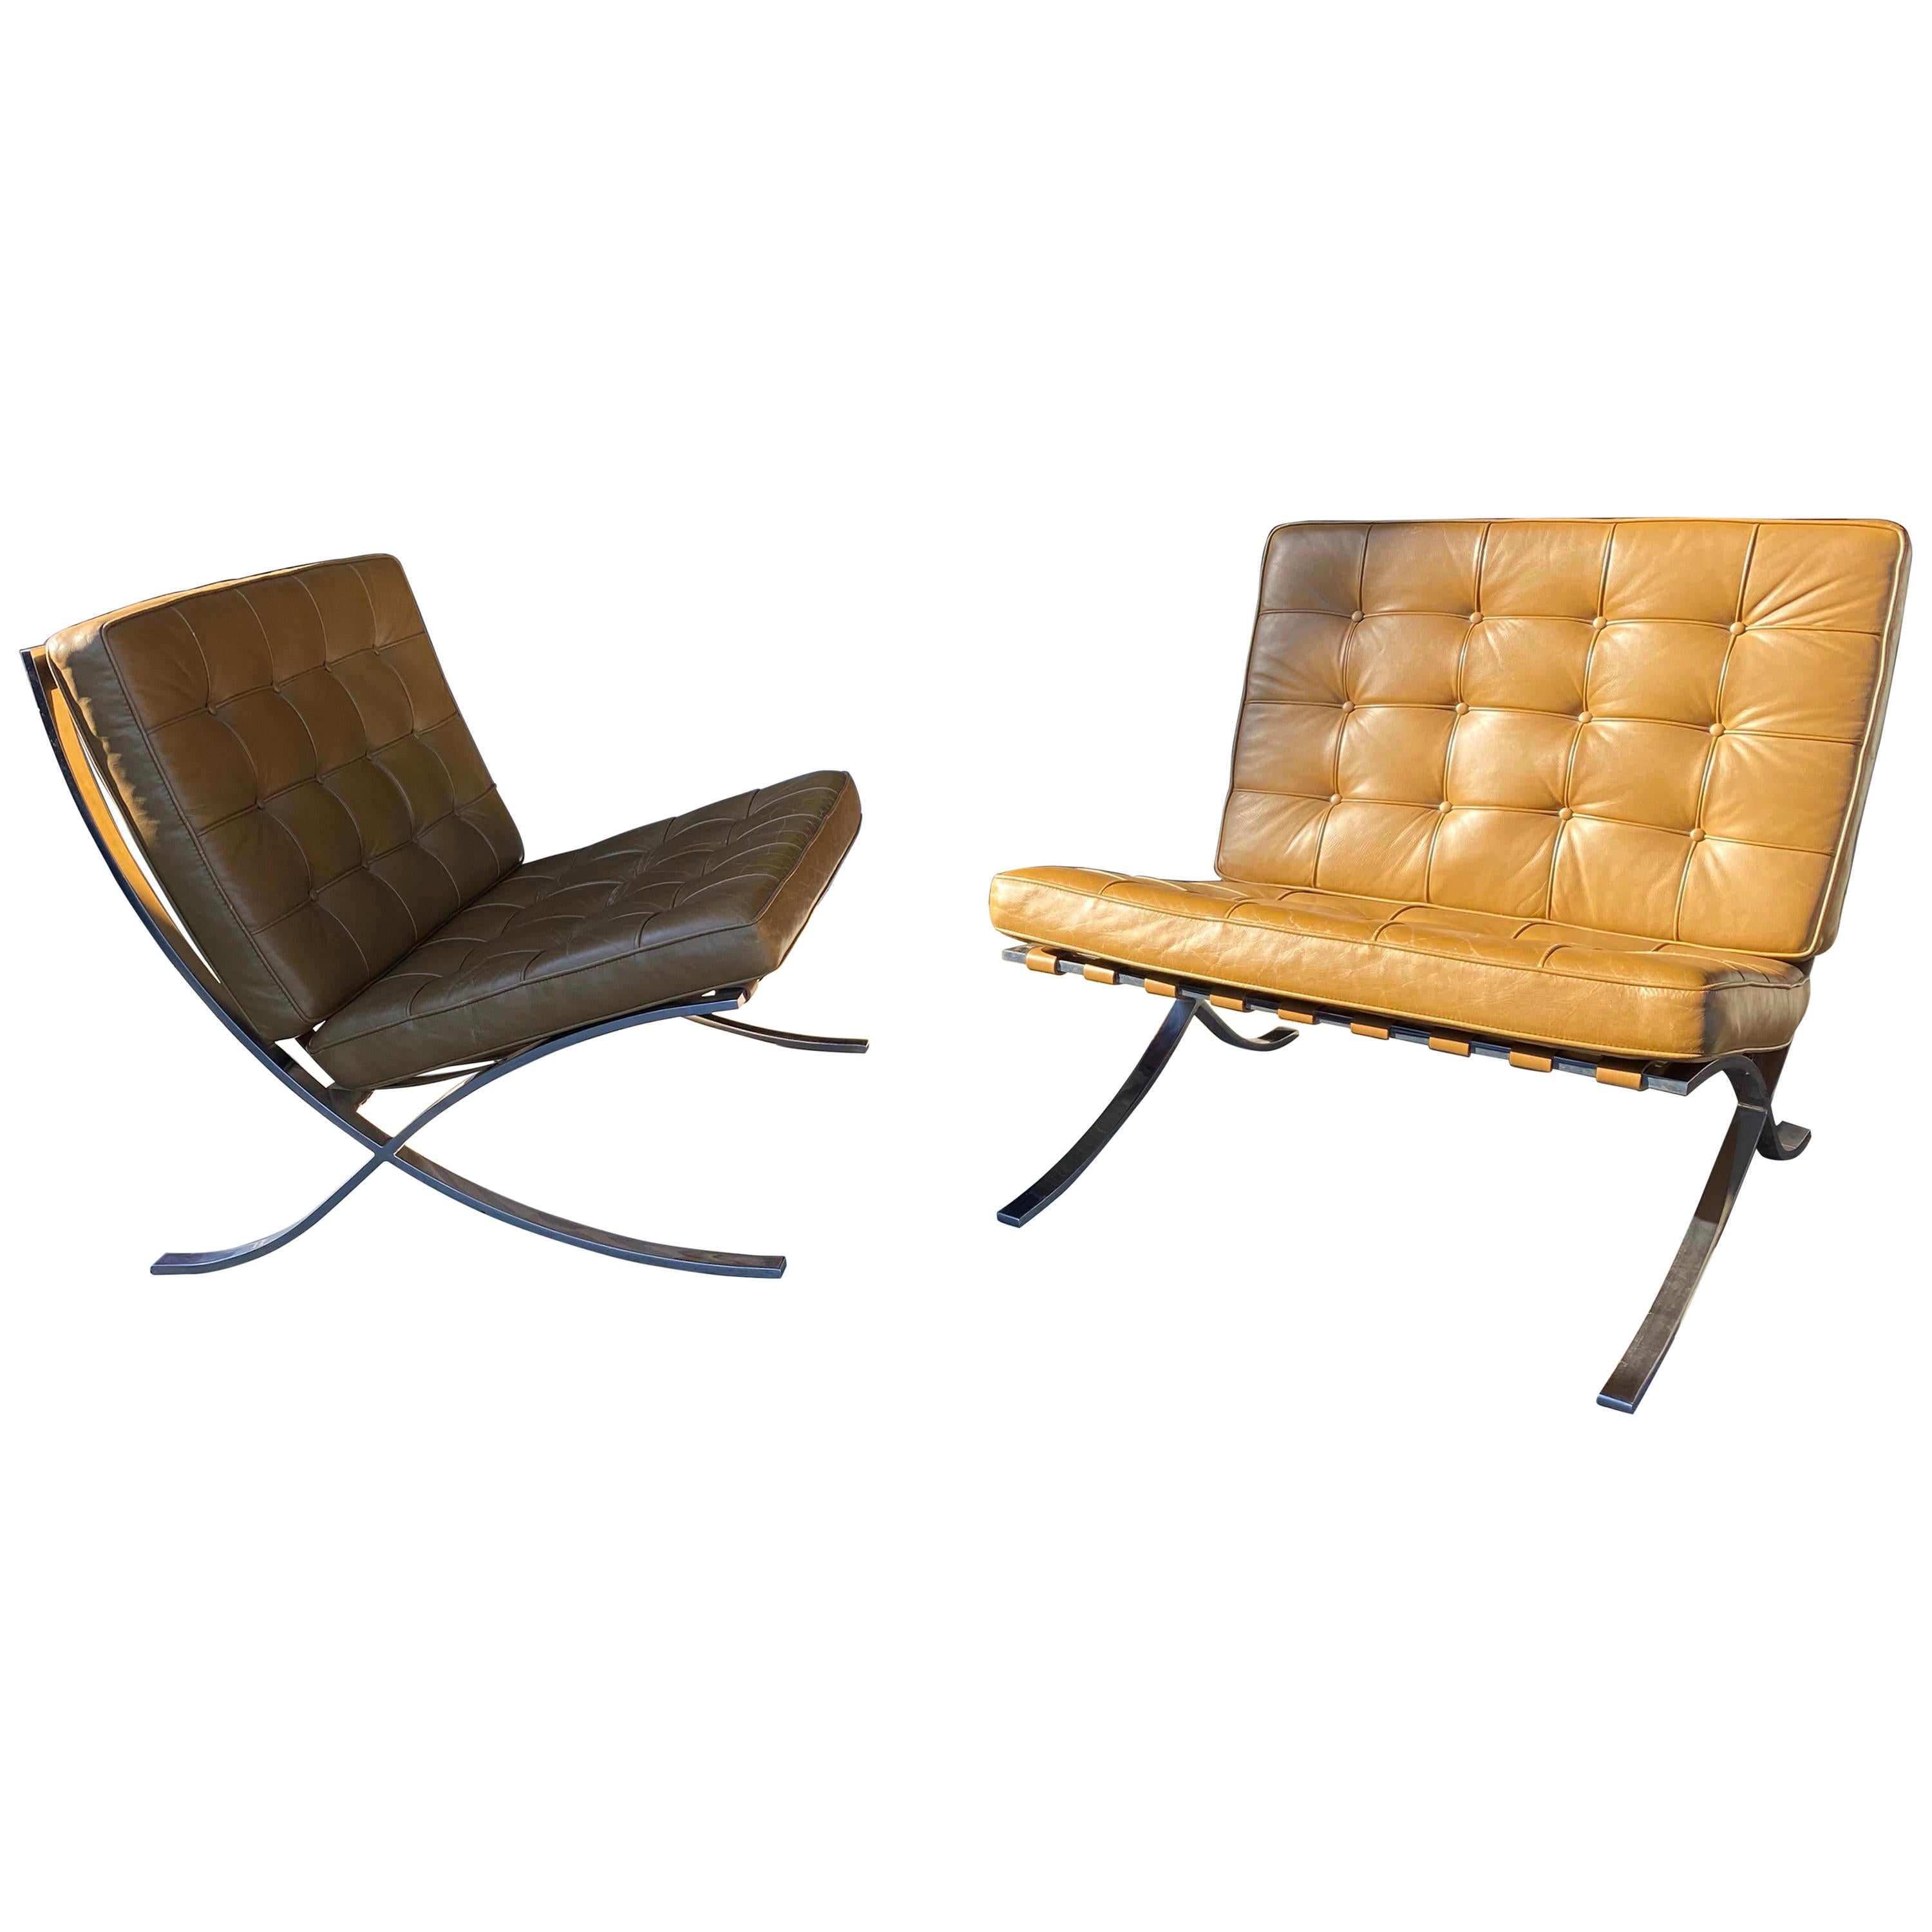 A collector's pair! These stunning pair of Barcelona chairs were made by Gerald R. Griffith under the close supervision of Mies van der Rohe, Pre-Knoll,, The Griffith chairs have extremely precise corners and less reinforcement at the central cross